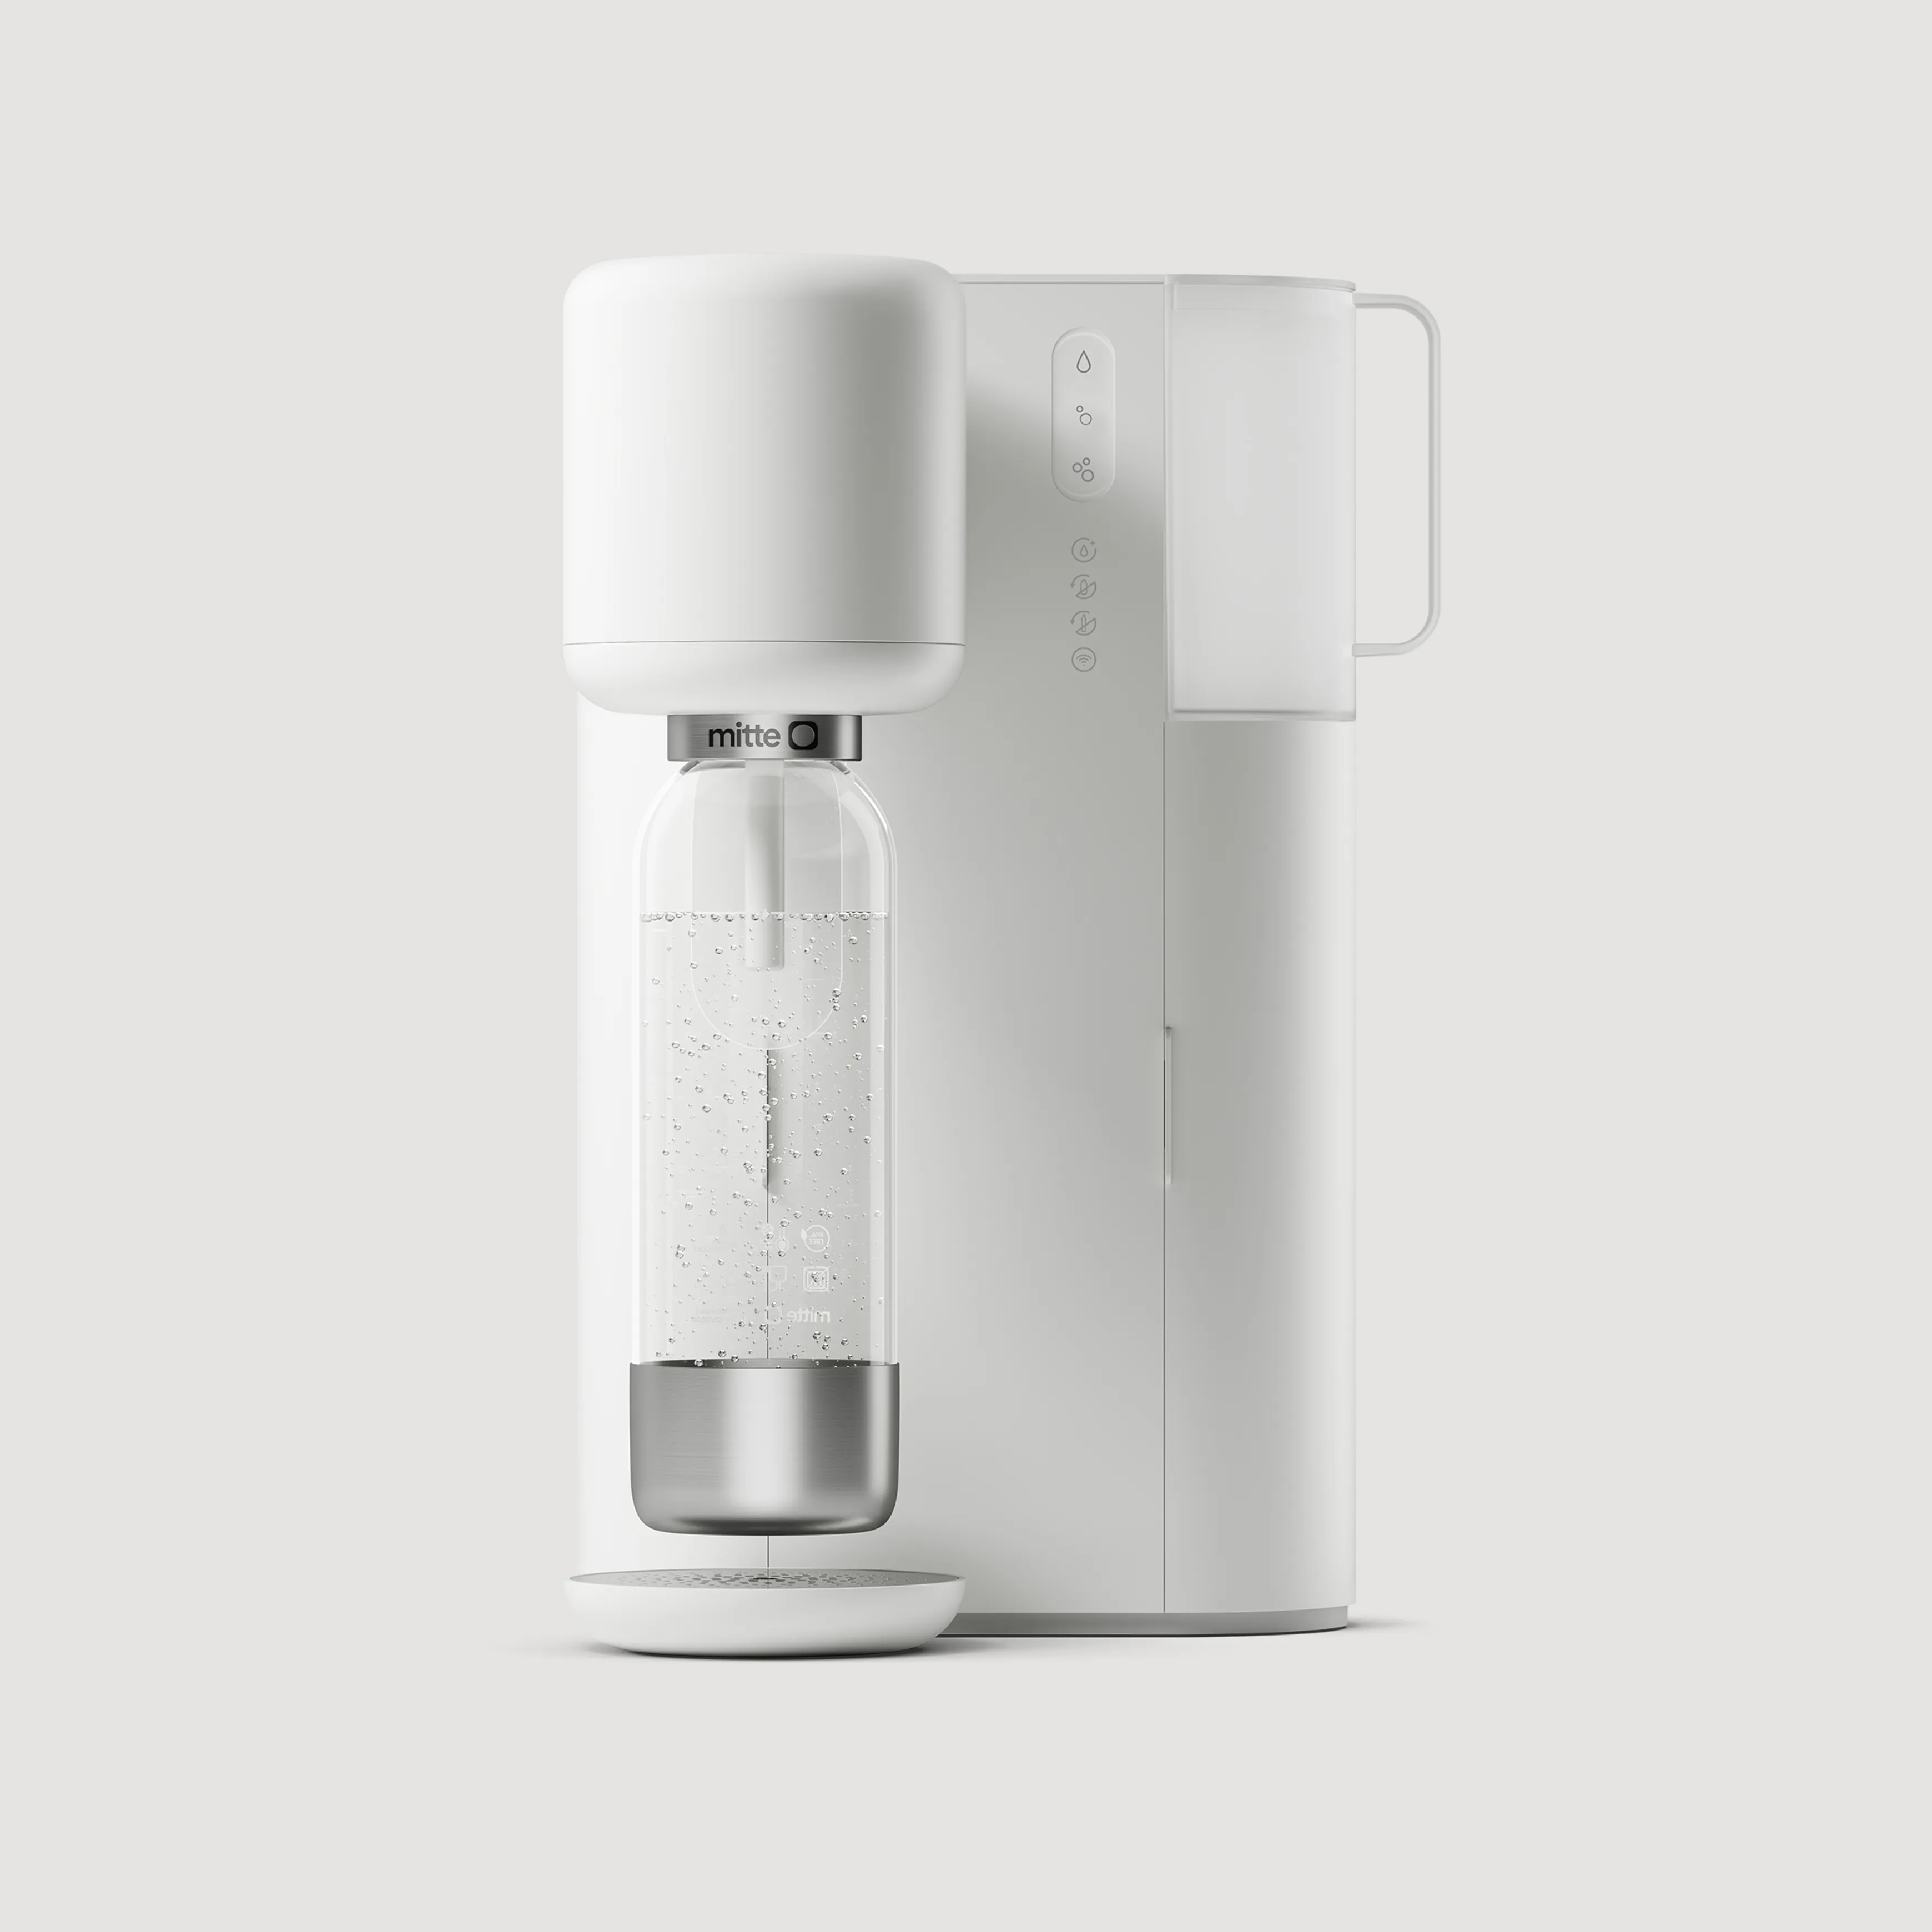 Front view of the Mitte water purifier